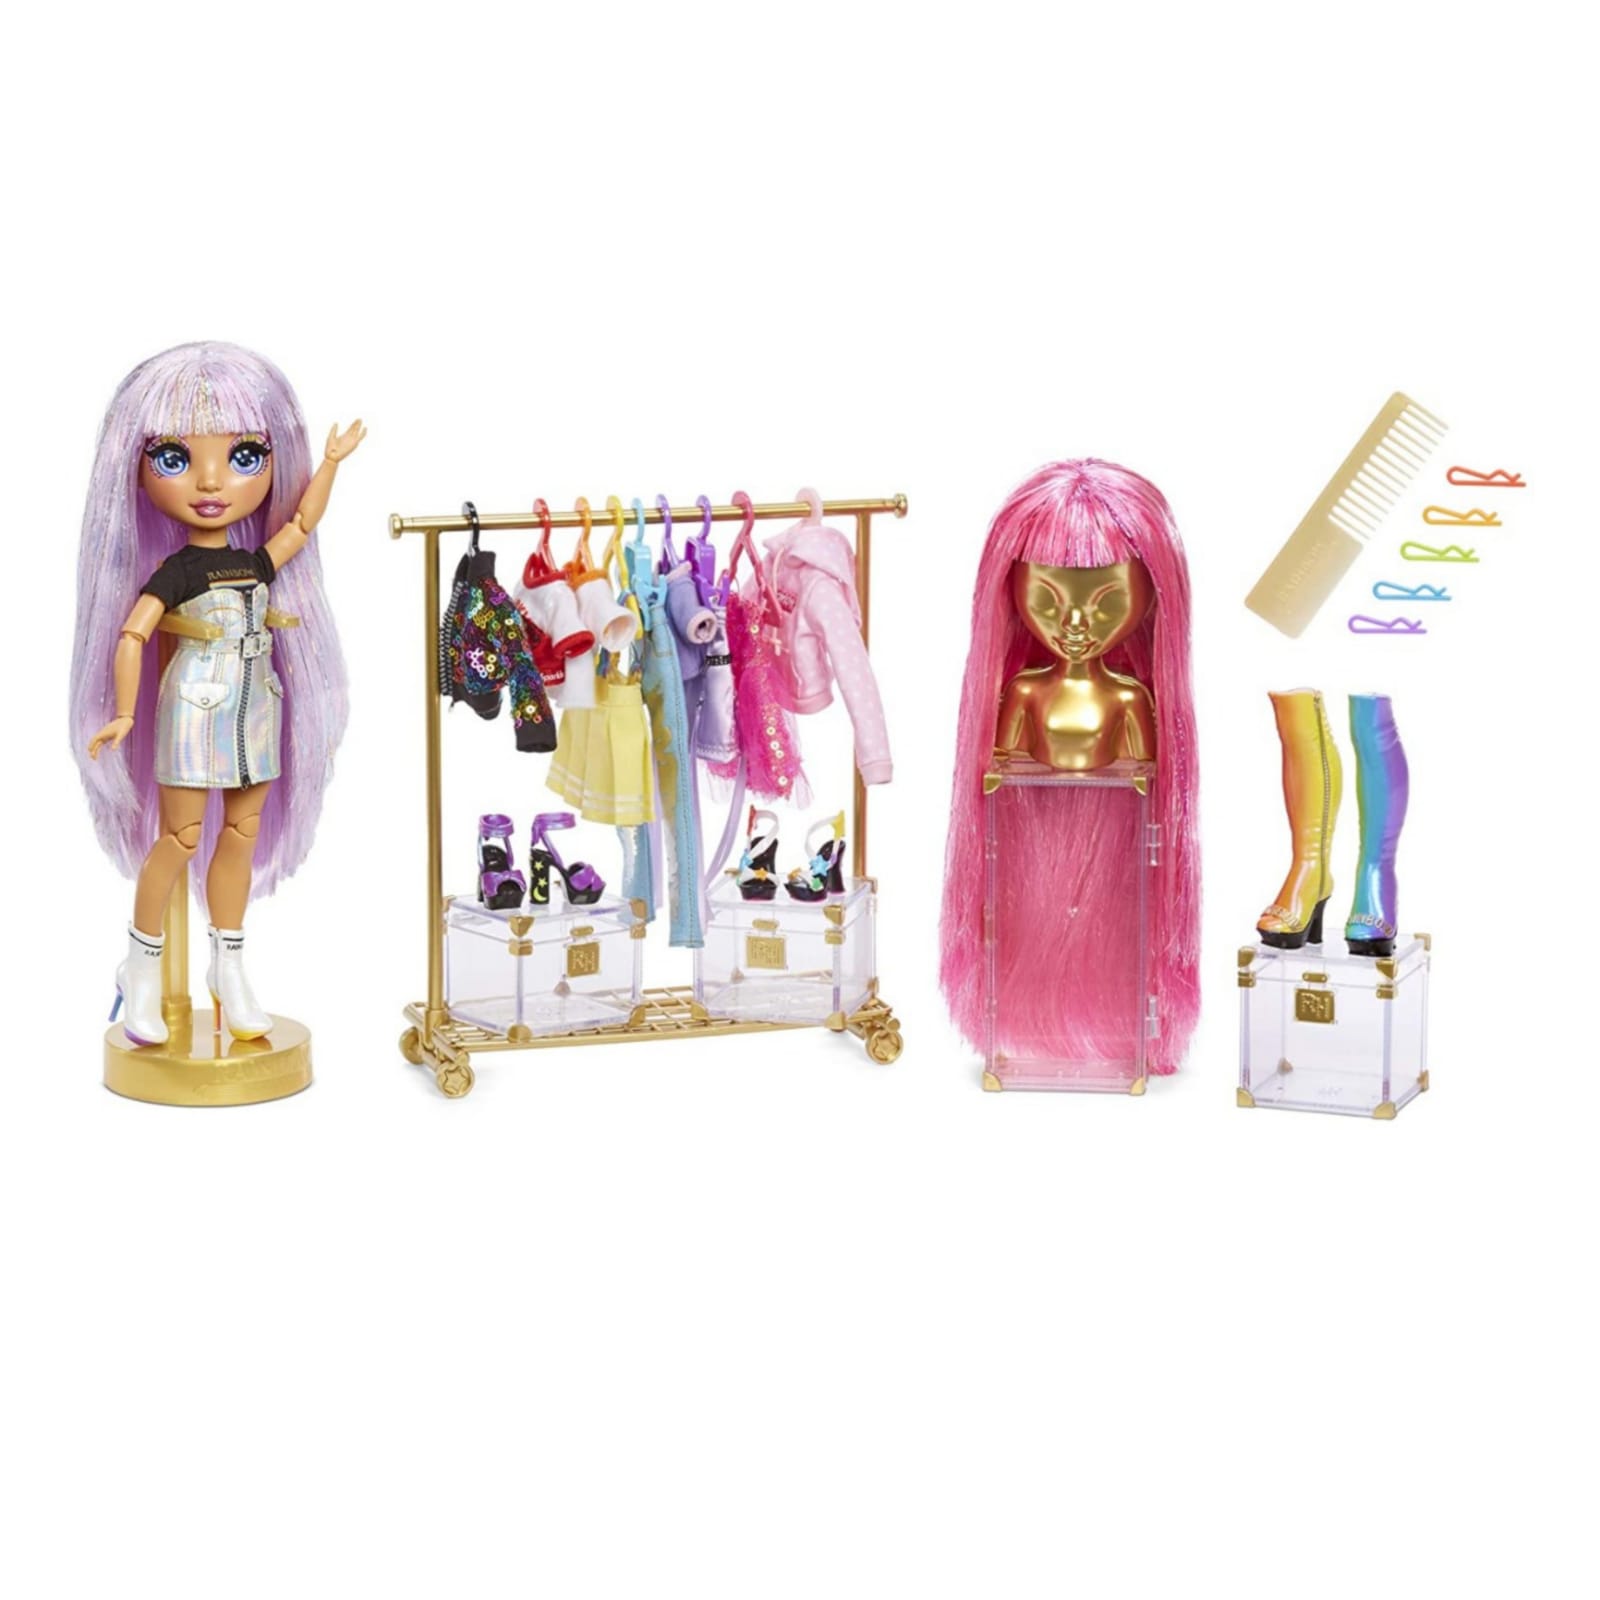 Rainbow High Fashion Studio Includes Free Exclusive Doll With Rainbow Of  Fashions - Toys 4You Store